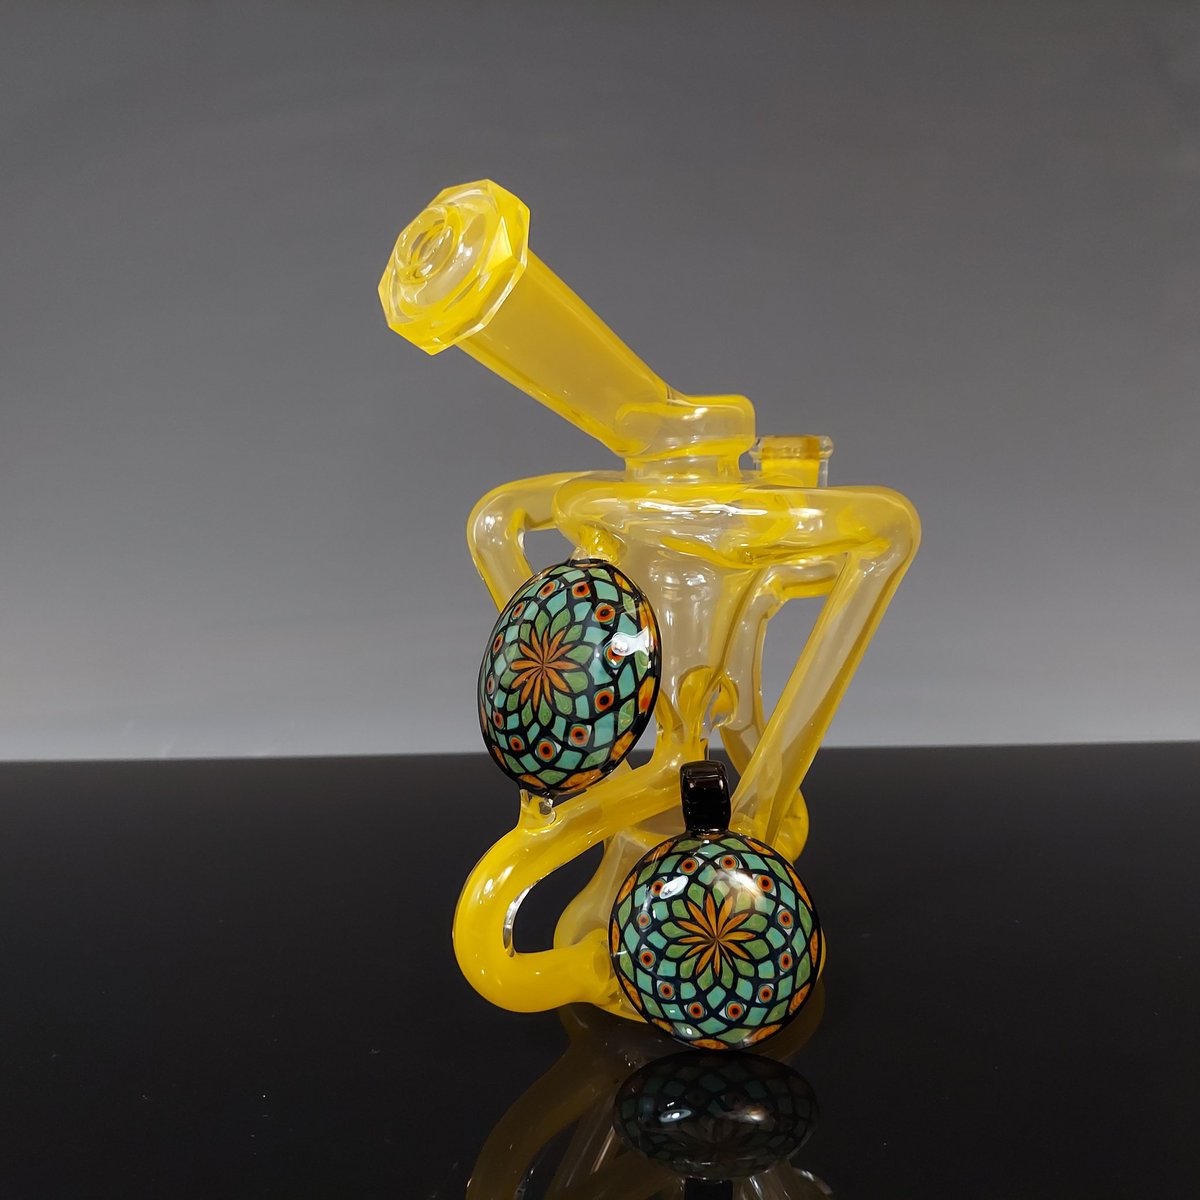 Faceted recycler with matching pendant. Color is ghosted goldenrod.
#glasspipes #shipleyglass #funkyfilla